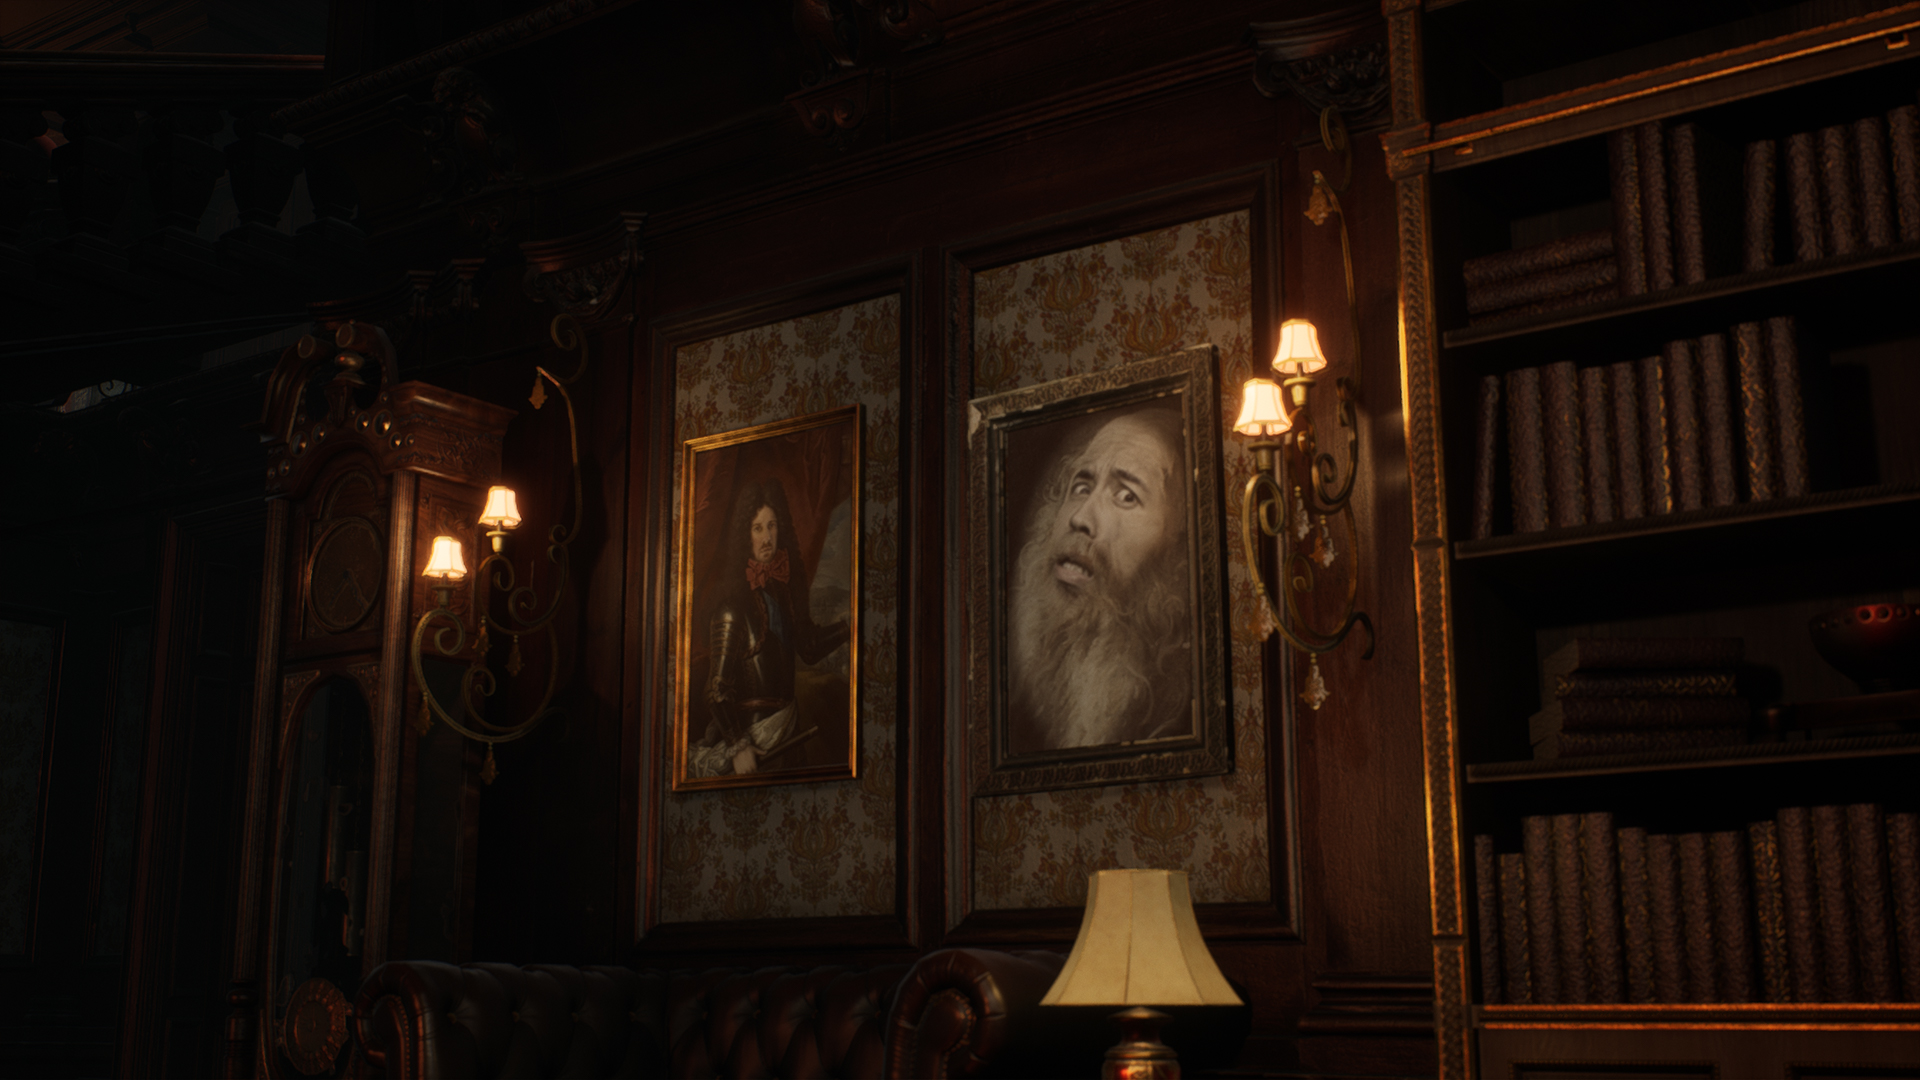 All portraits on the wall are Meptik team members.